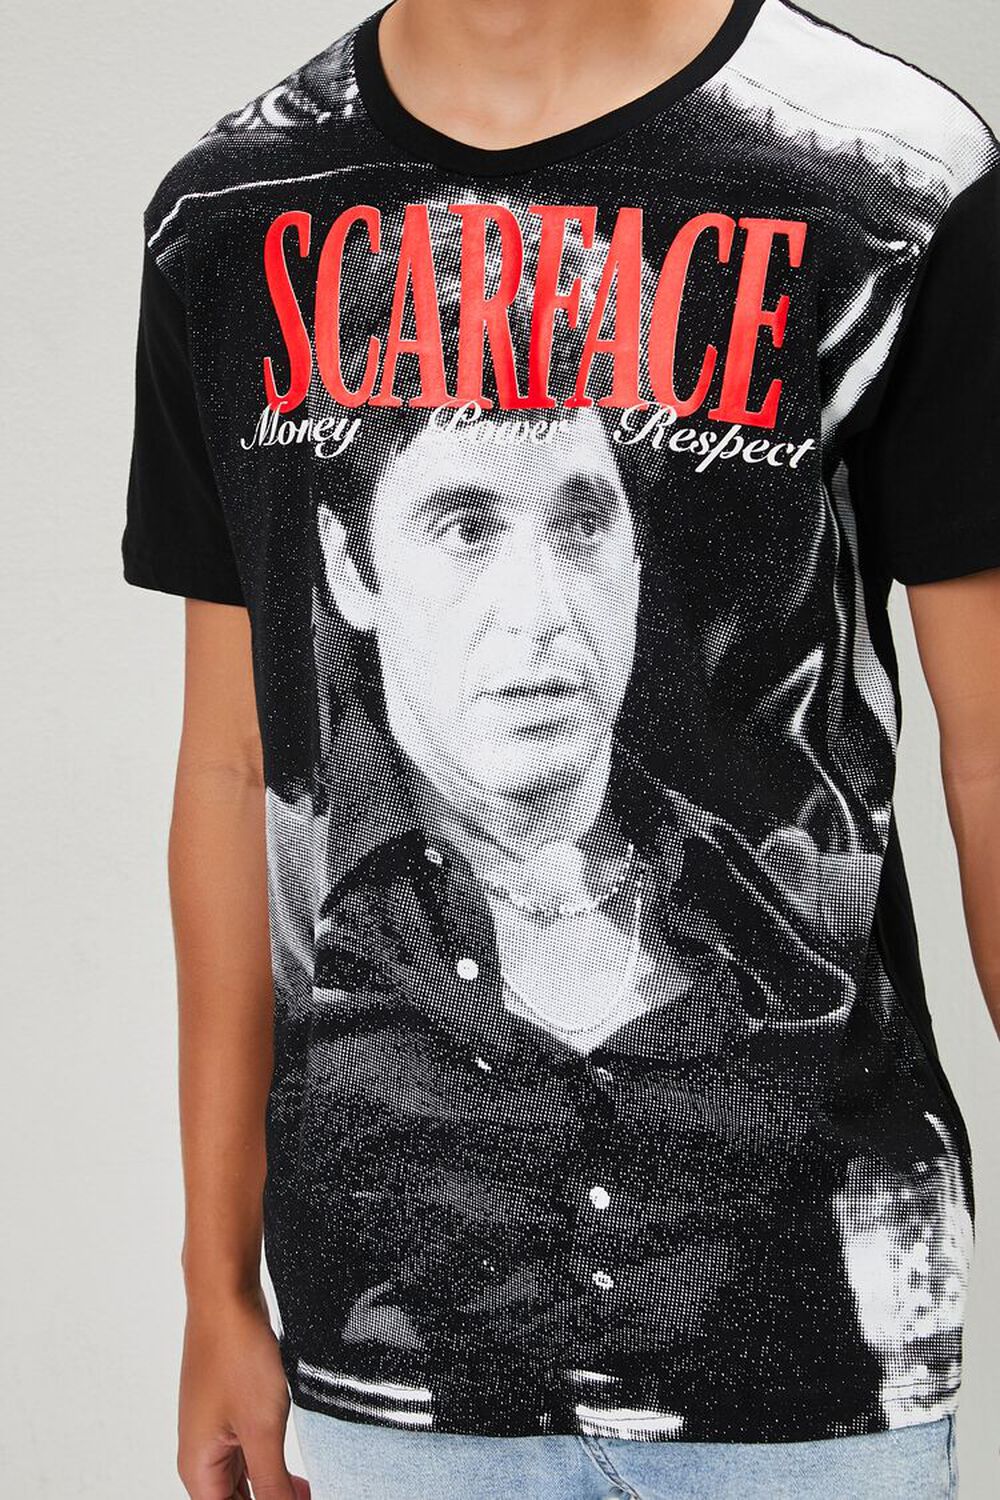 Scarface Graphic Short-Sleeve Tee